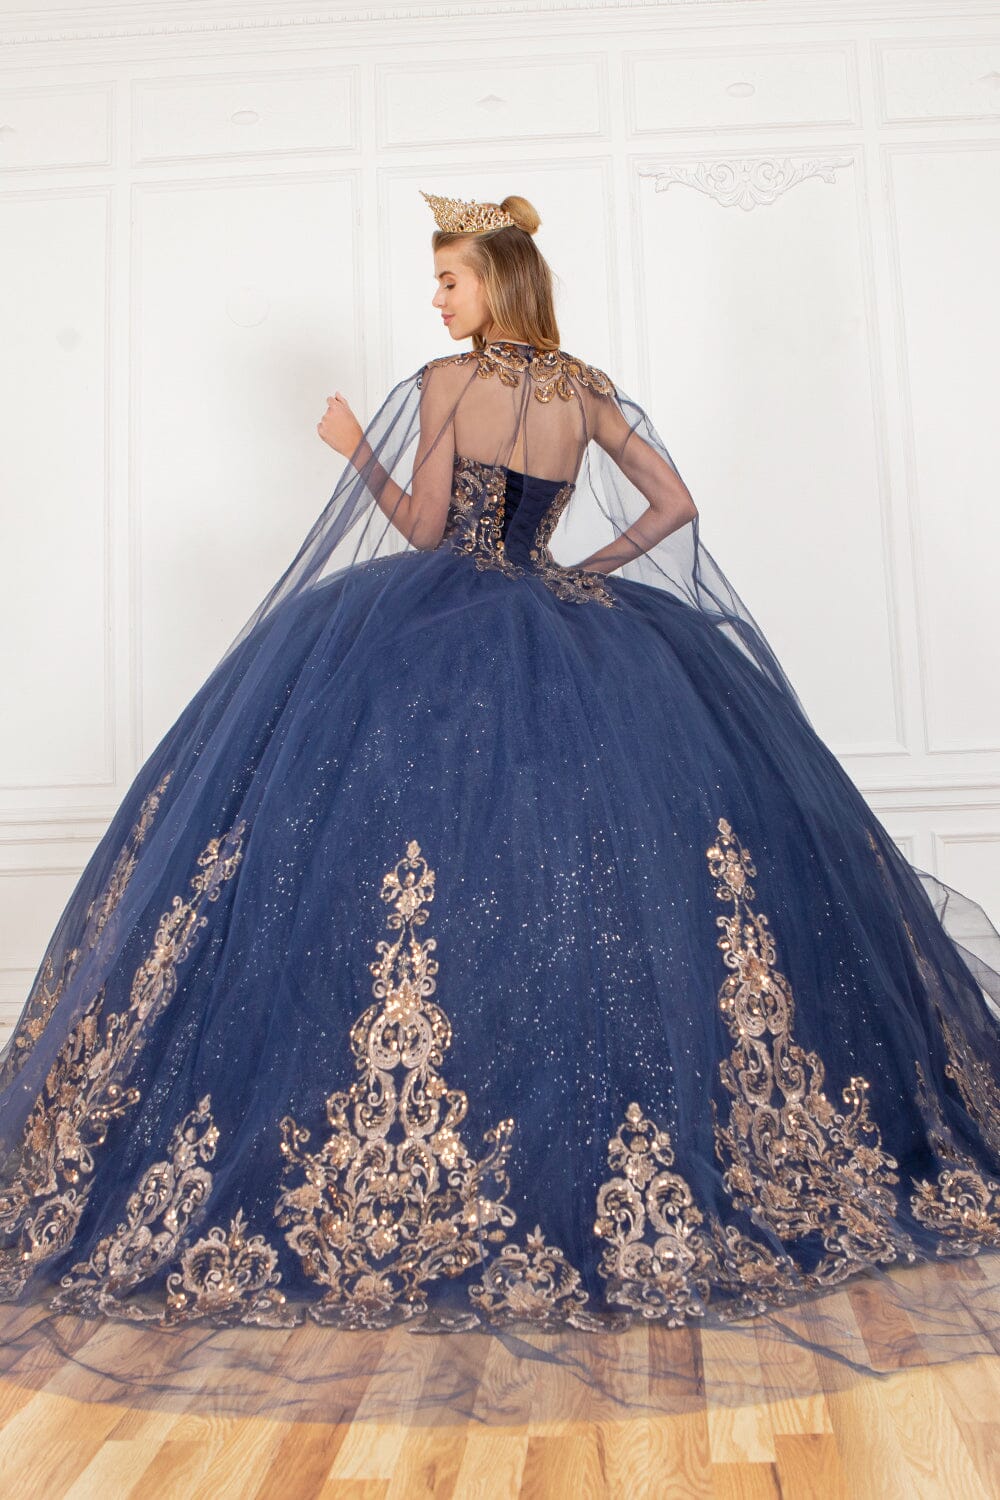 Applique Strapless Cape Ball Gown by Cinderella Couture 8063J